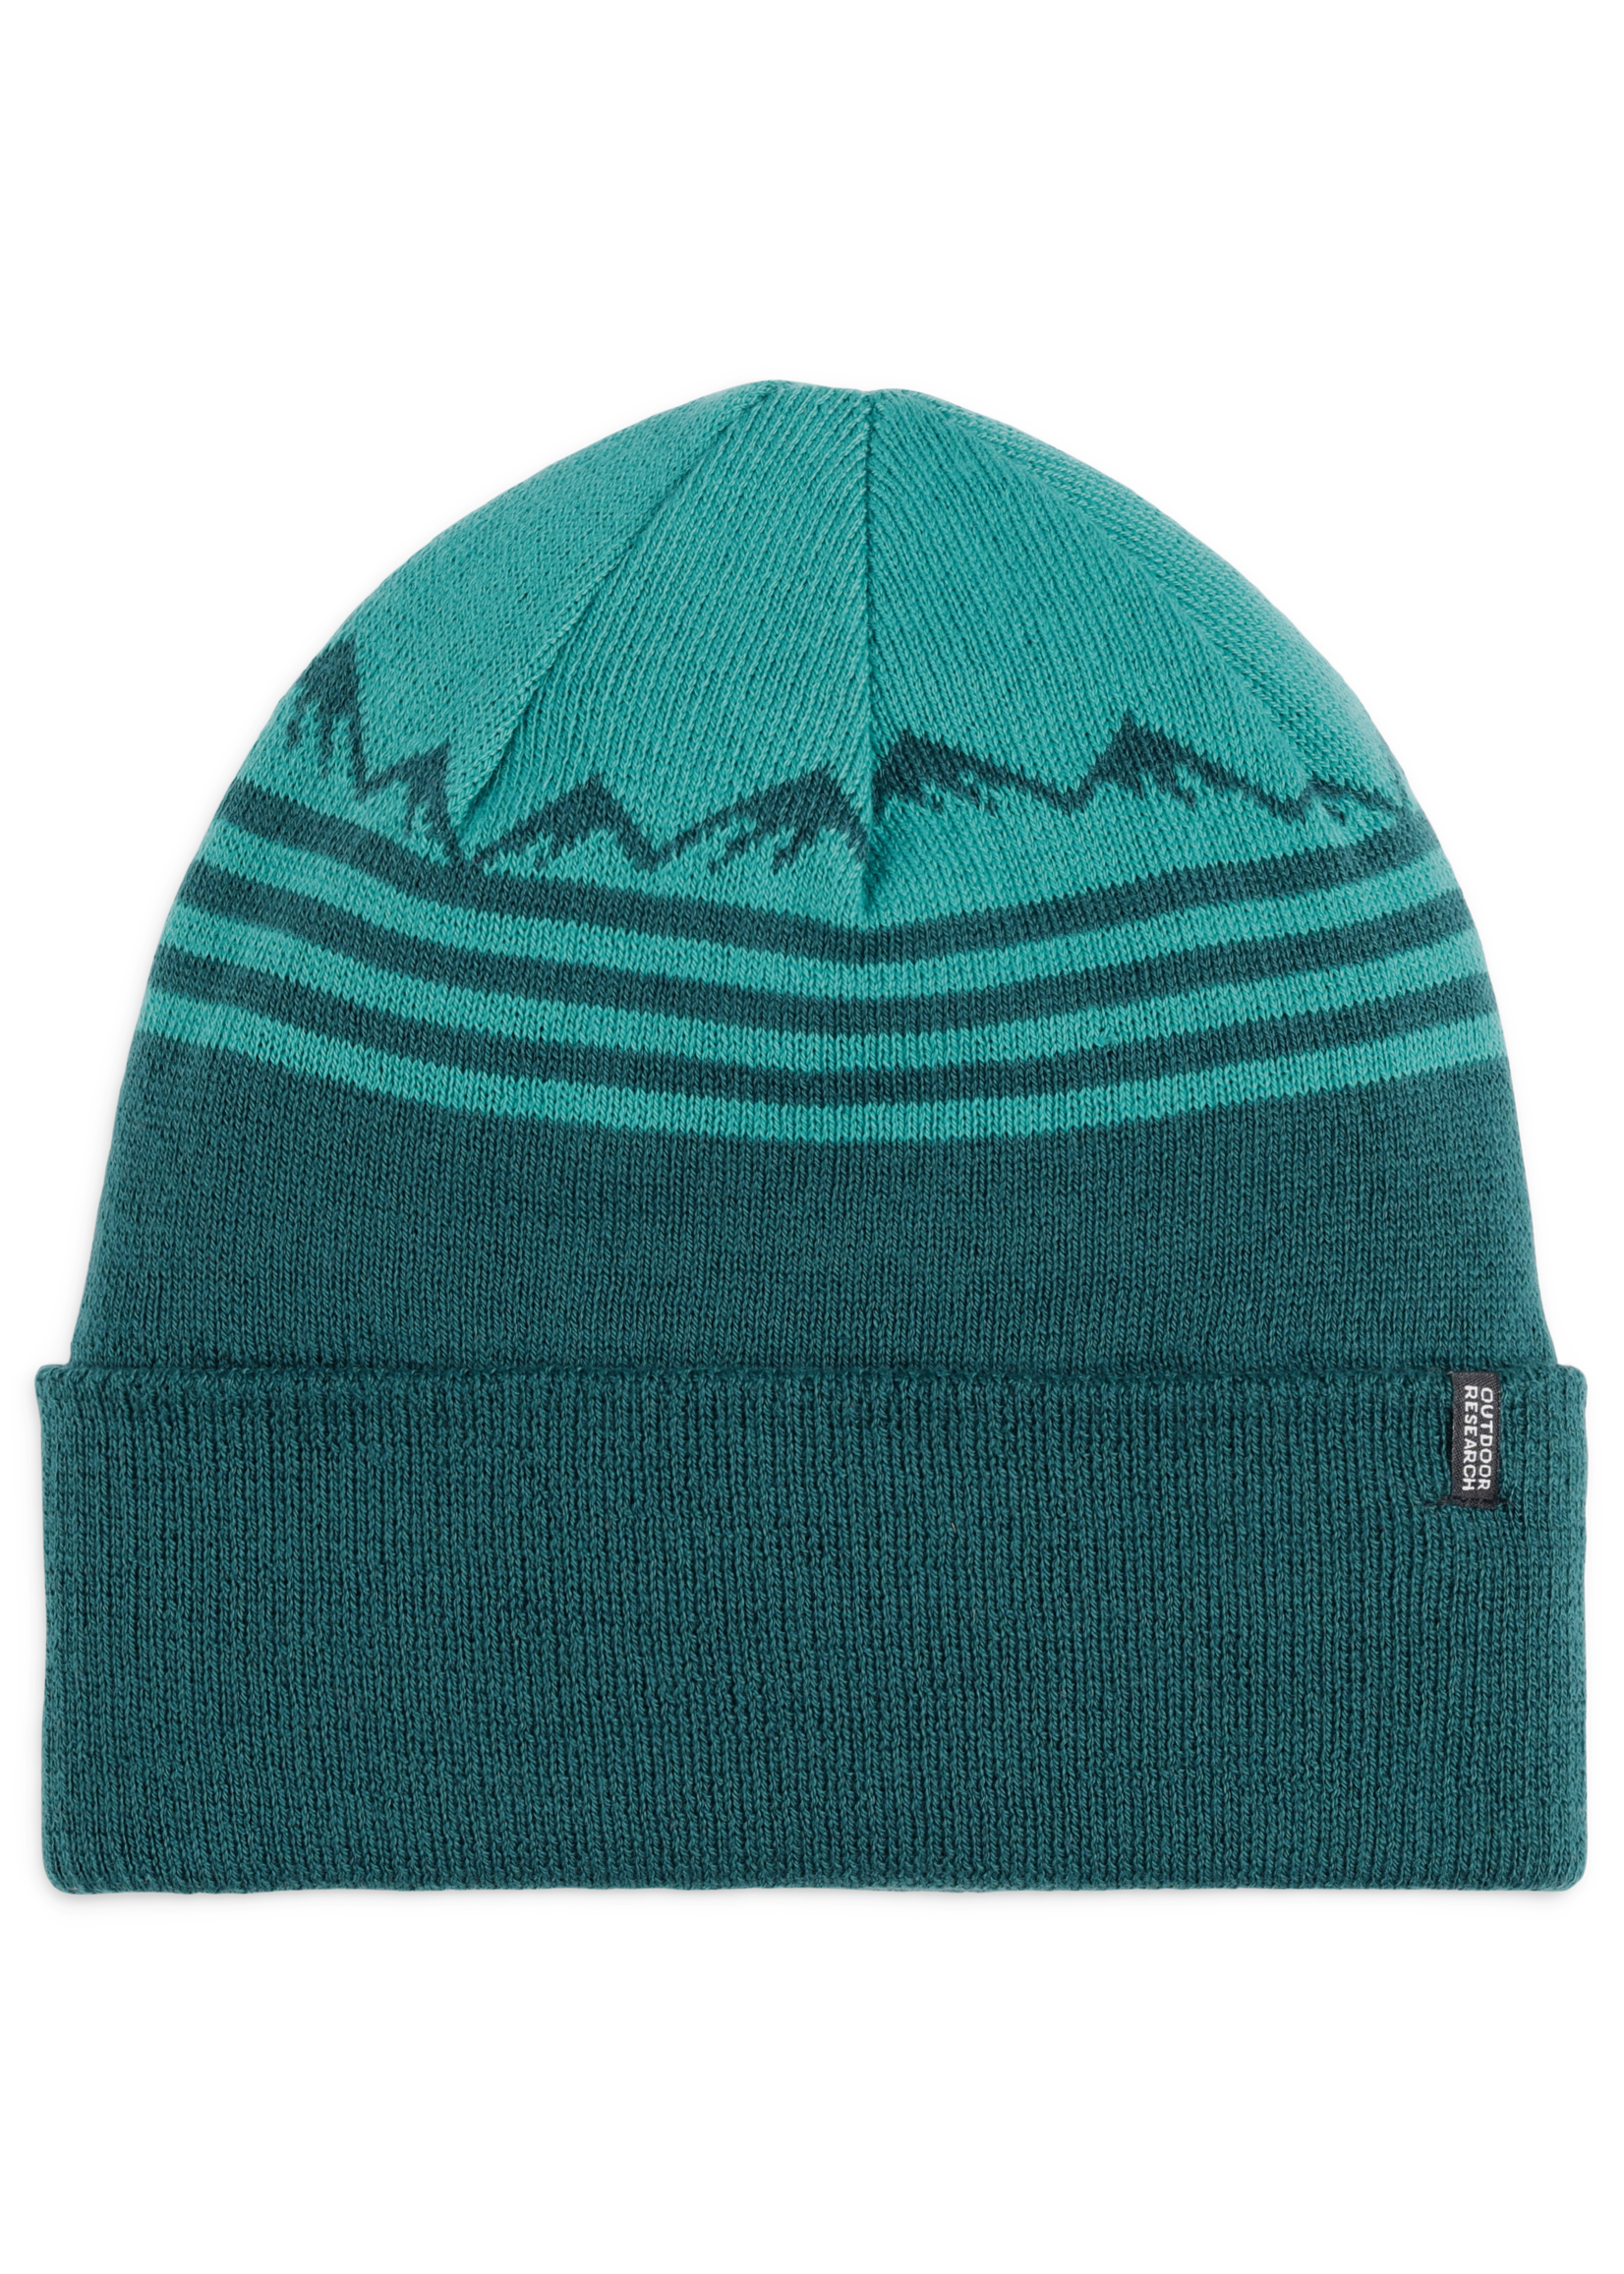 Outdoor Research Kick Turn Beanie